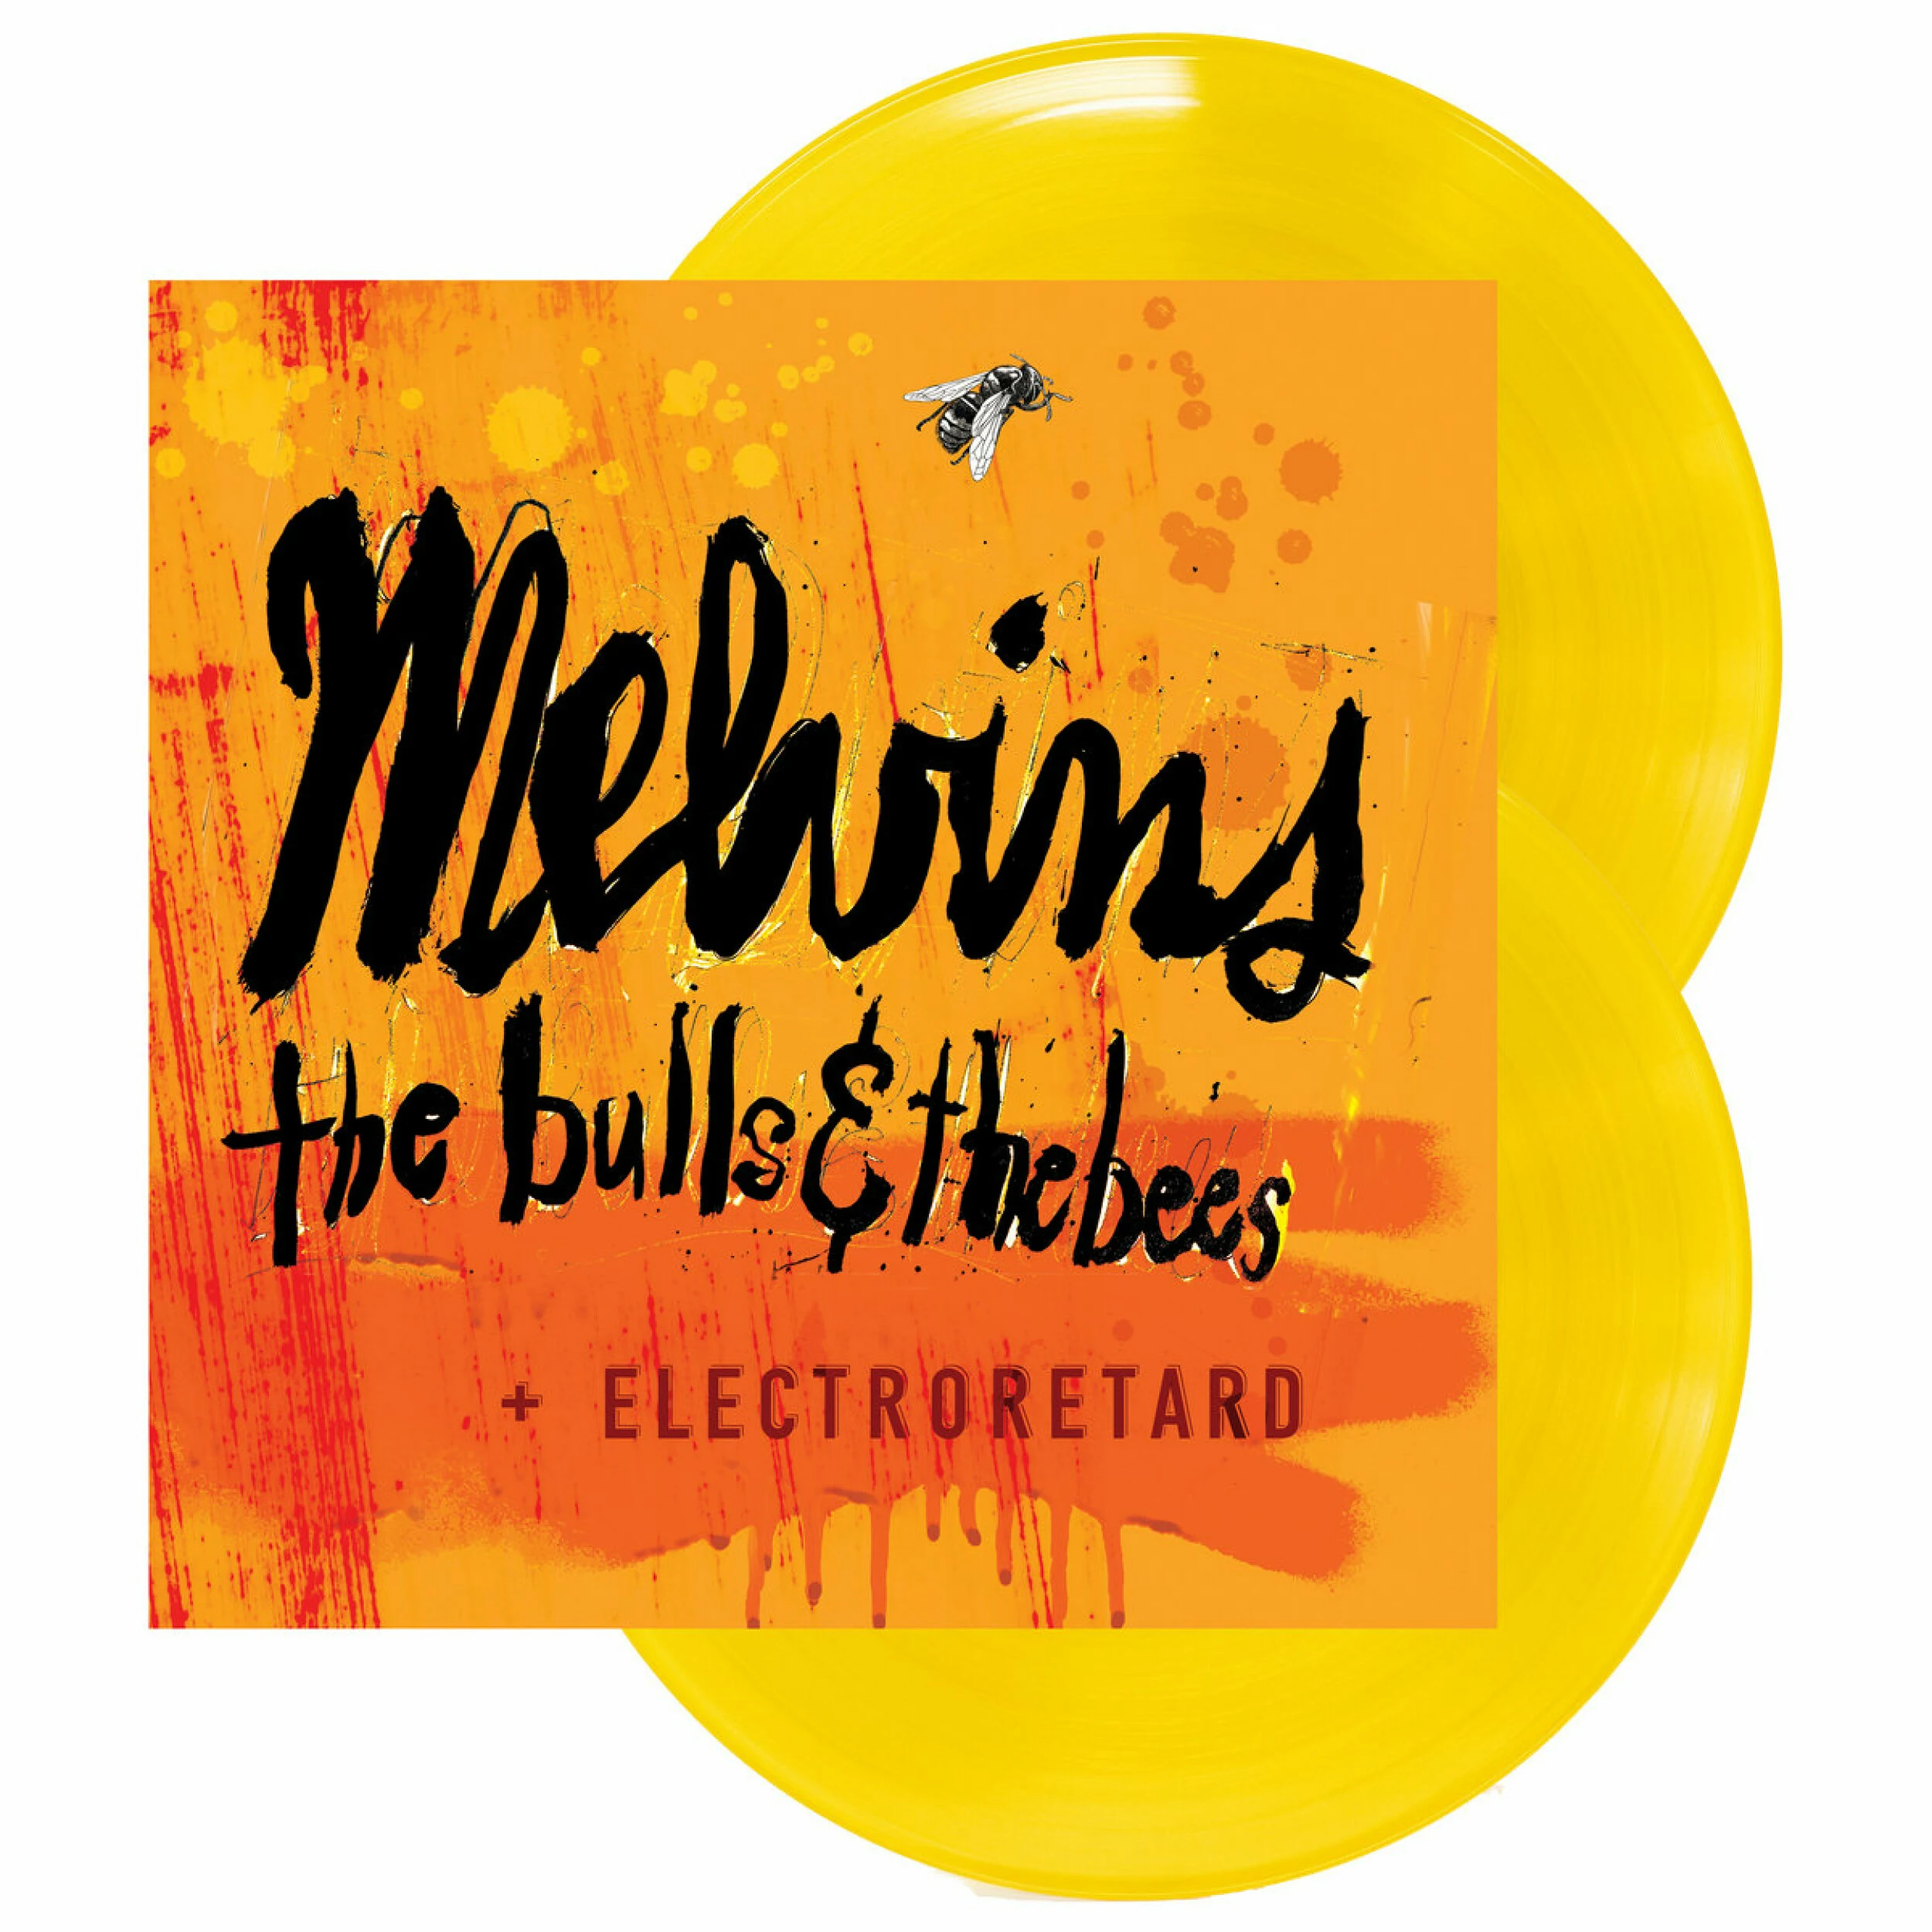 MELVINS - The Bulls & The Bees / Electroretard [CANARY YELLOW DOUBLE VINYL]